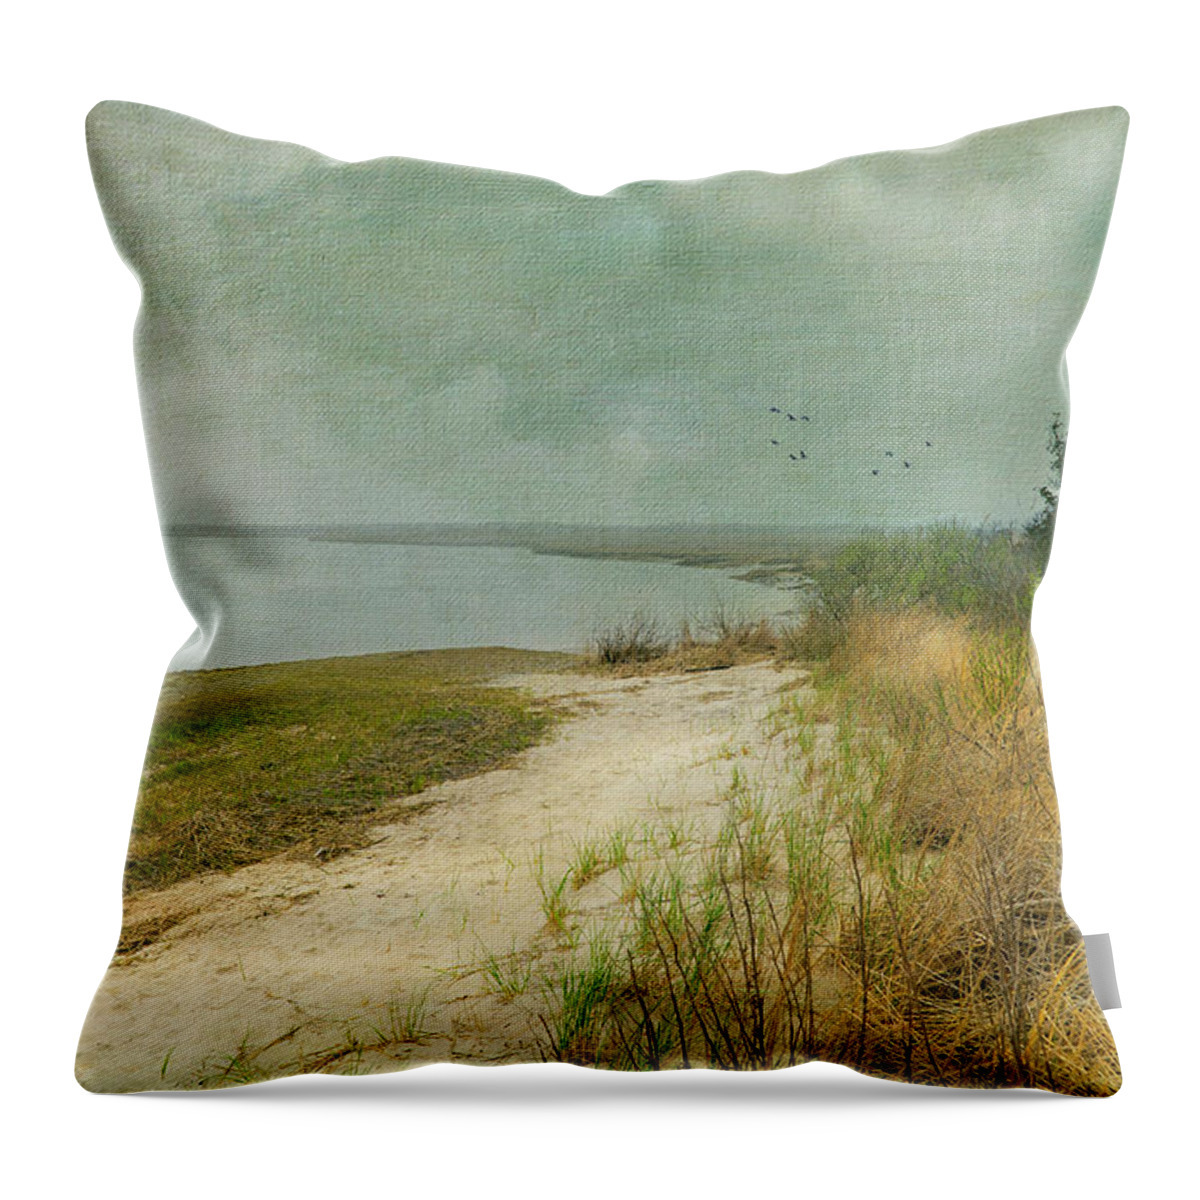 Landscape Throw Pillow featuring the photograph Home by the Sea by John Rivera